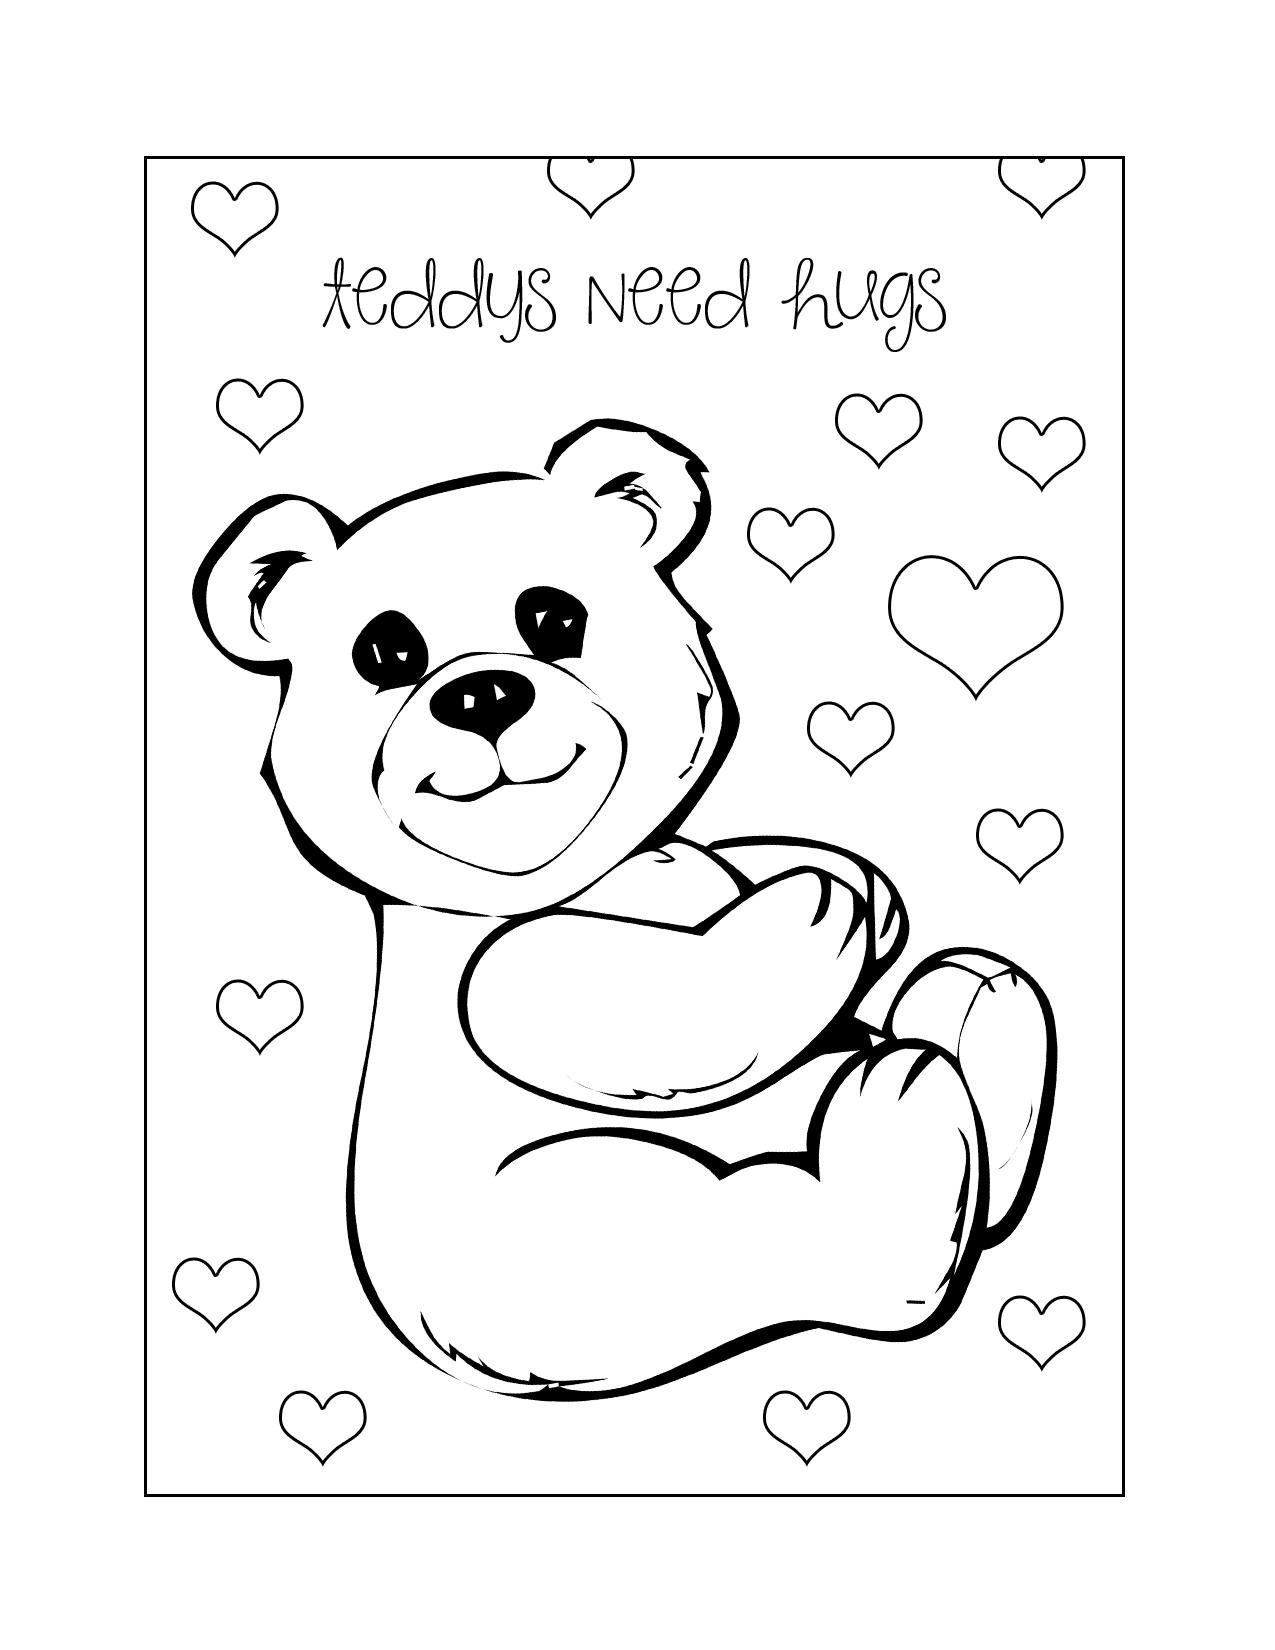 Teddys Need Hugs Coloring Page